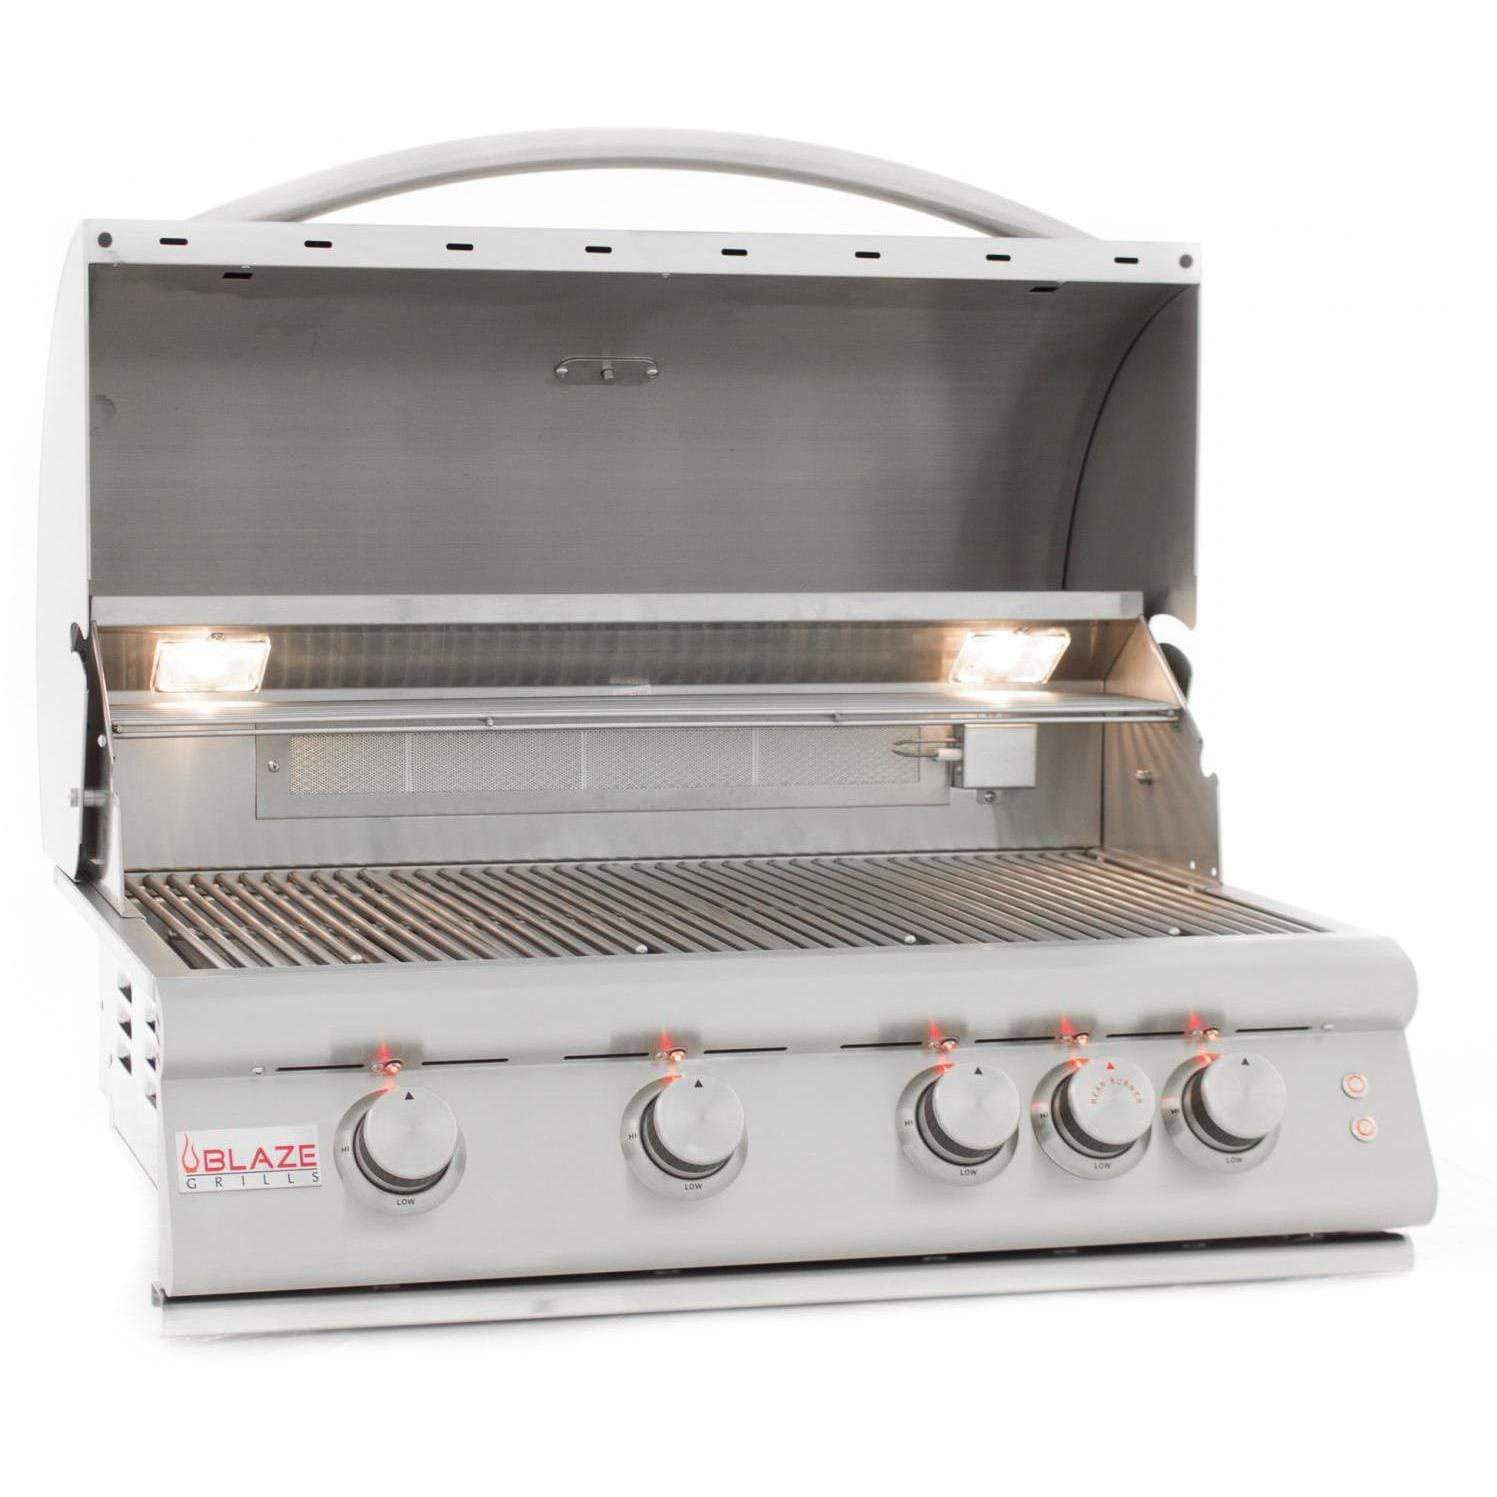 Blaze Gas Grill 32" 4 Burner with Red knob Lights and Interior Lights